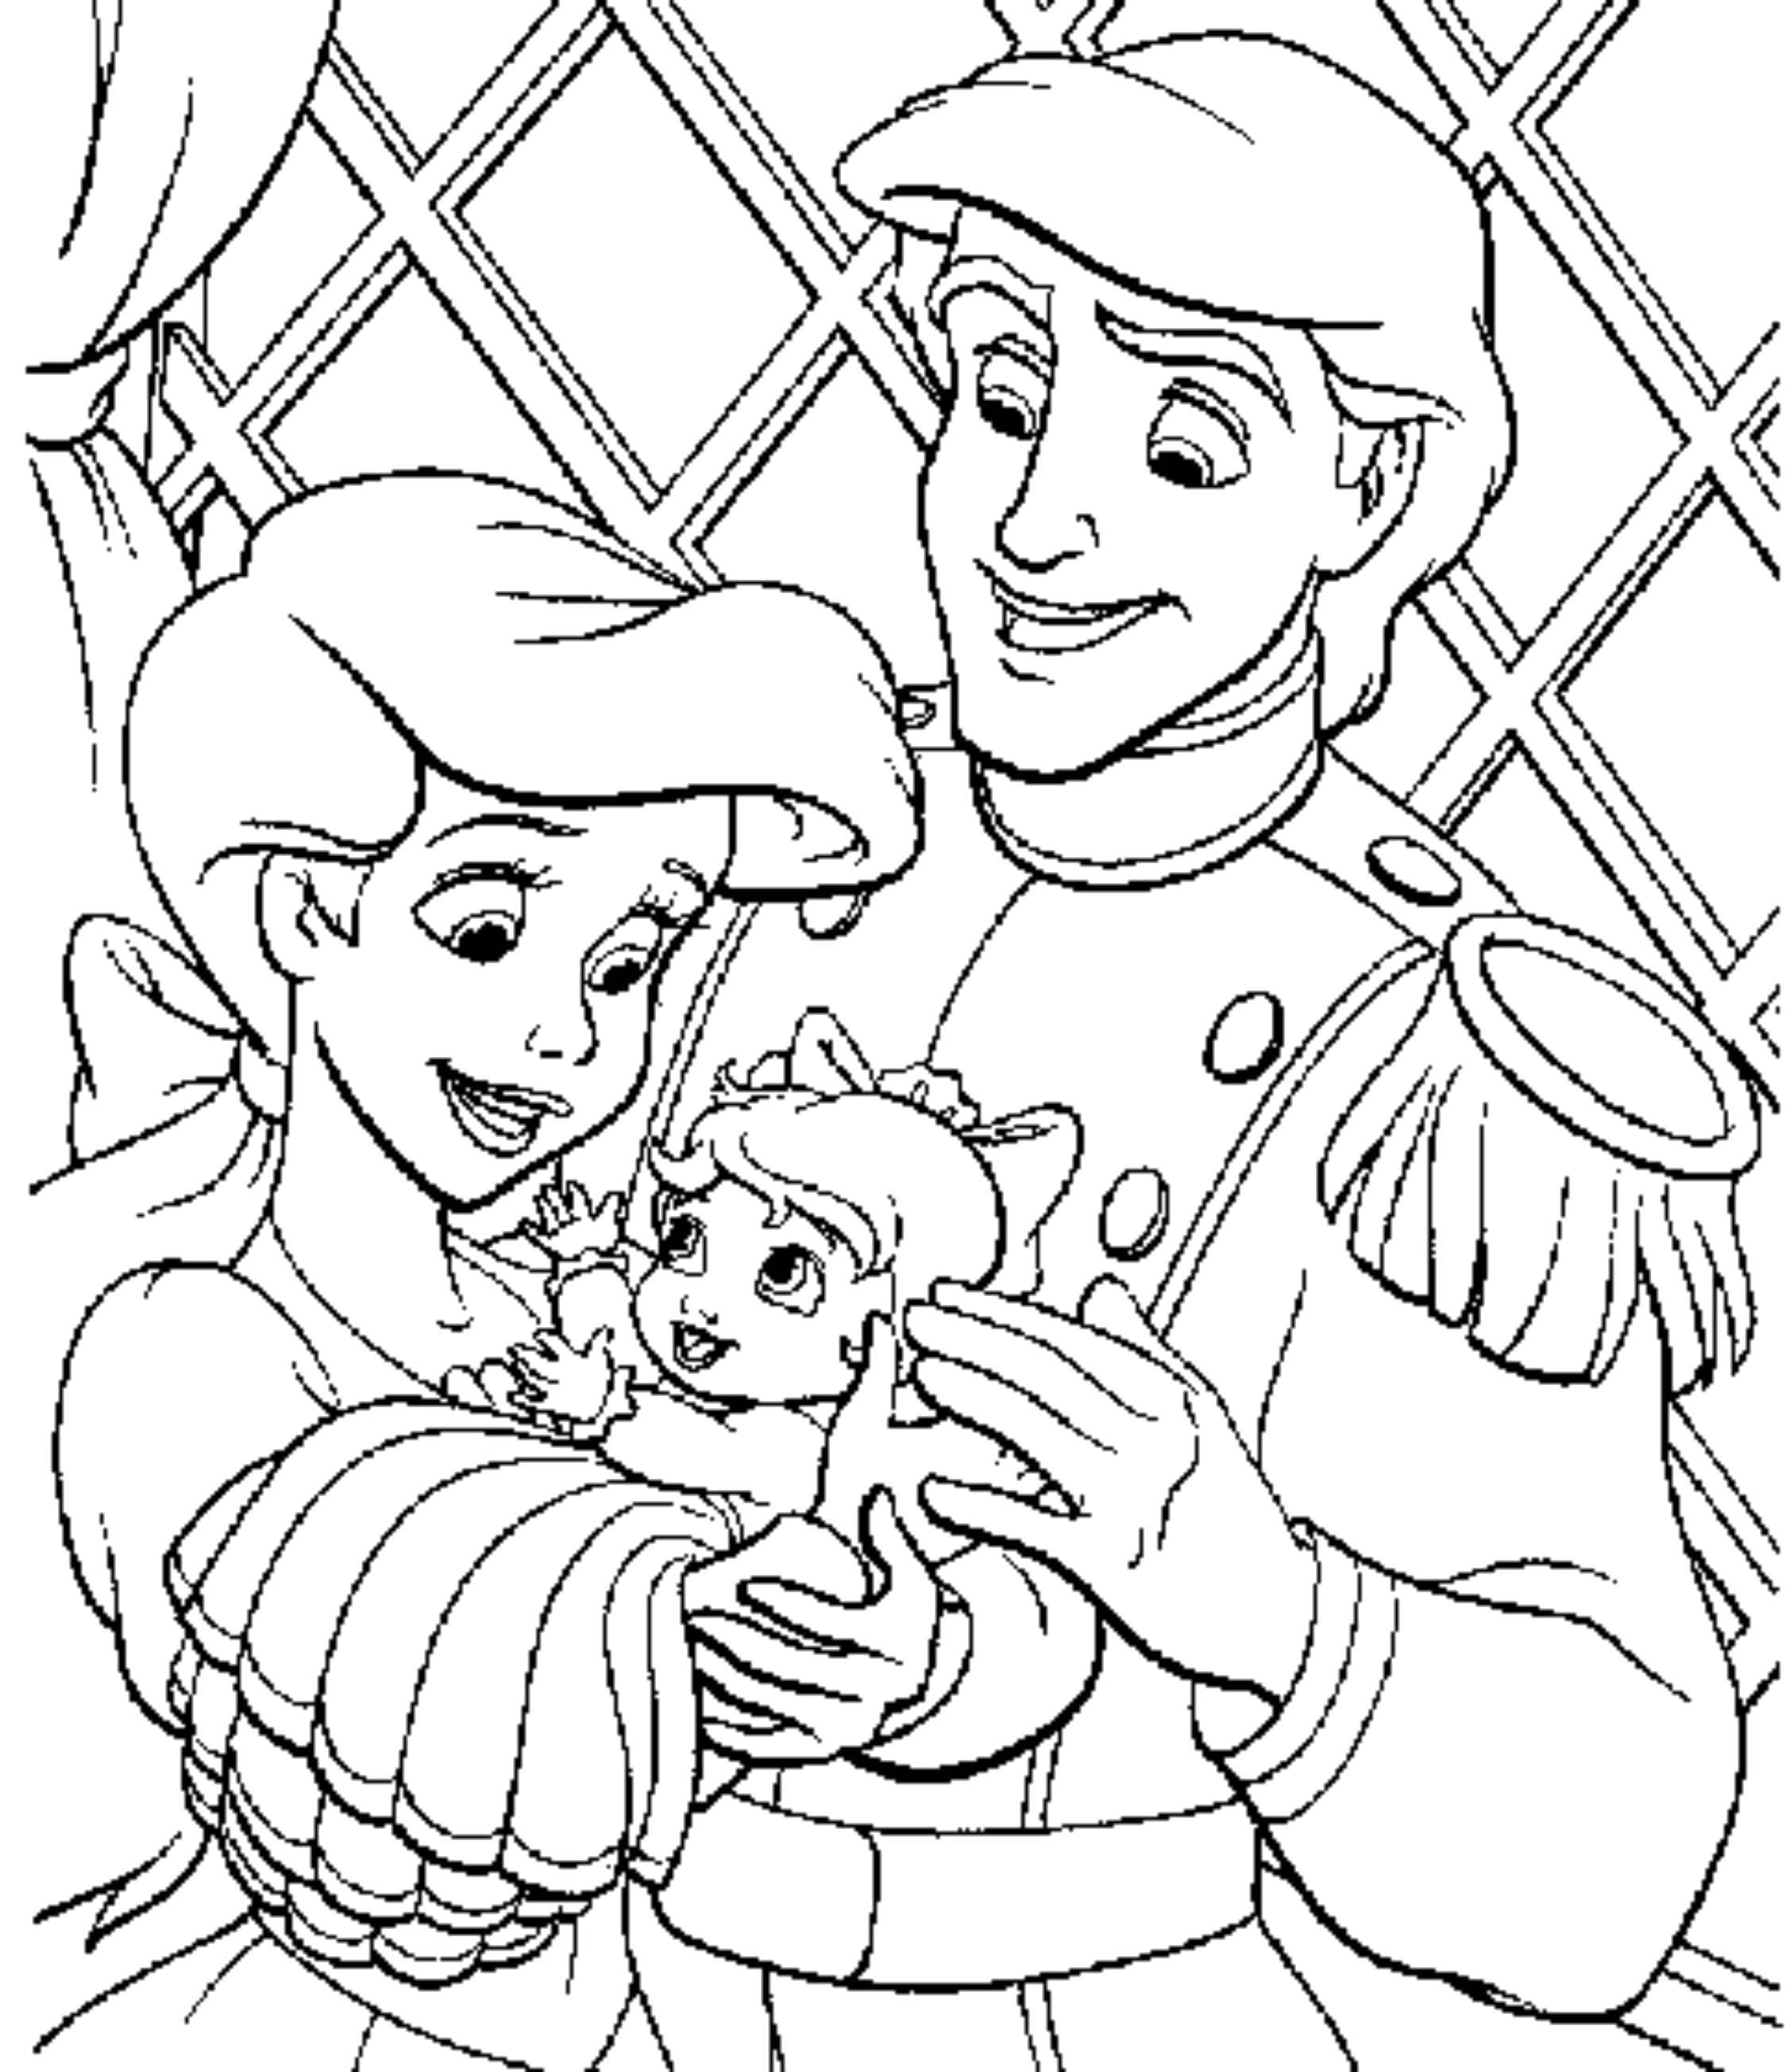 Coloring Baby Ariel and Prince. Category Disney coloring pages. Tags:  Disney, the little mermaid, Ariel.